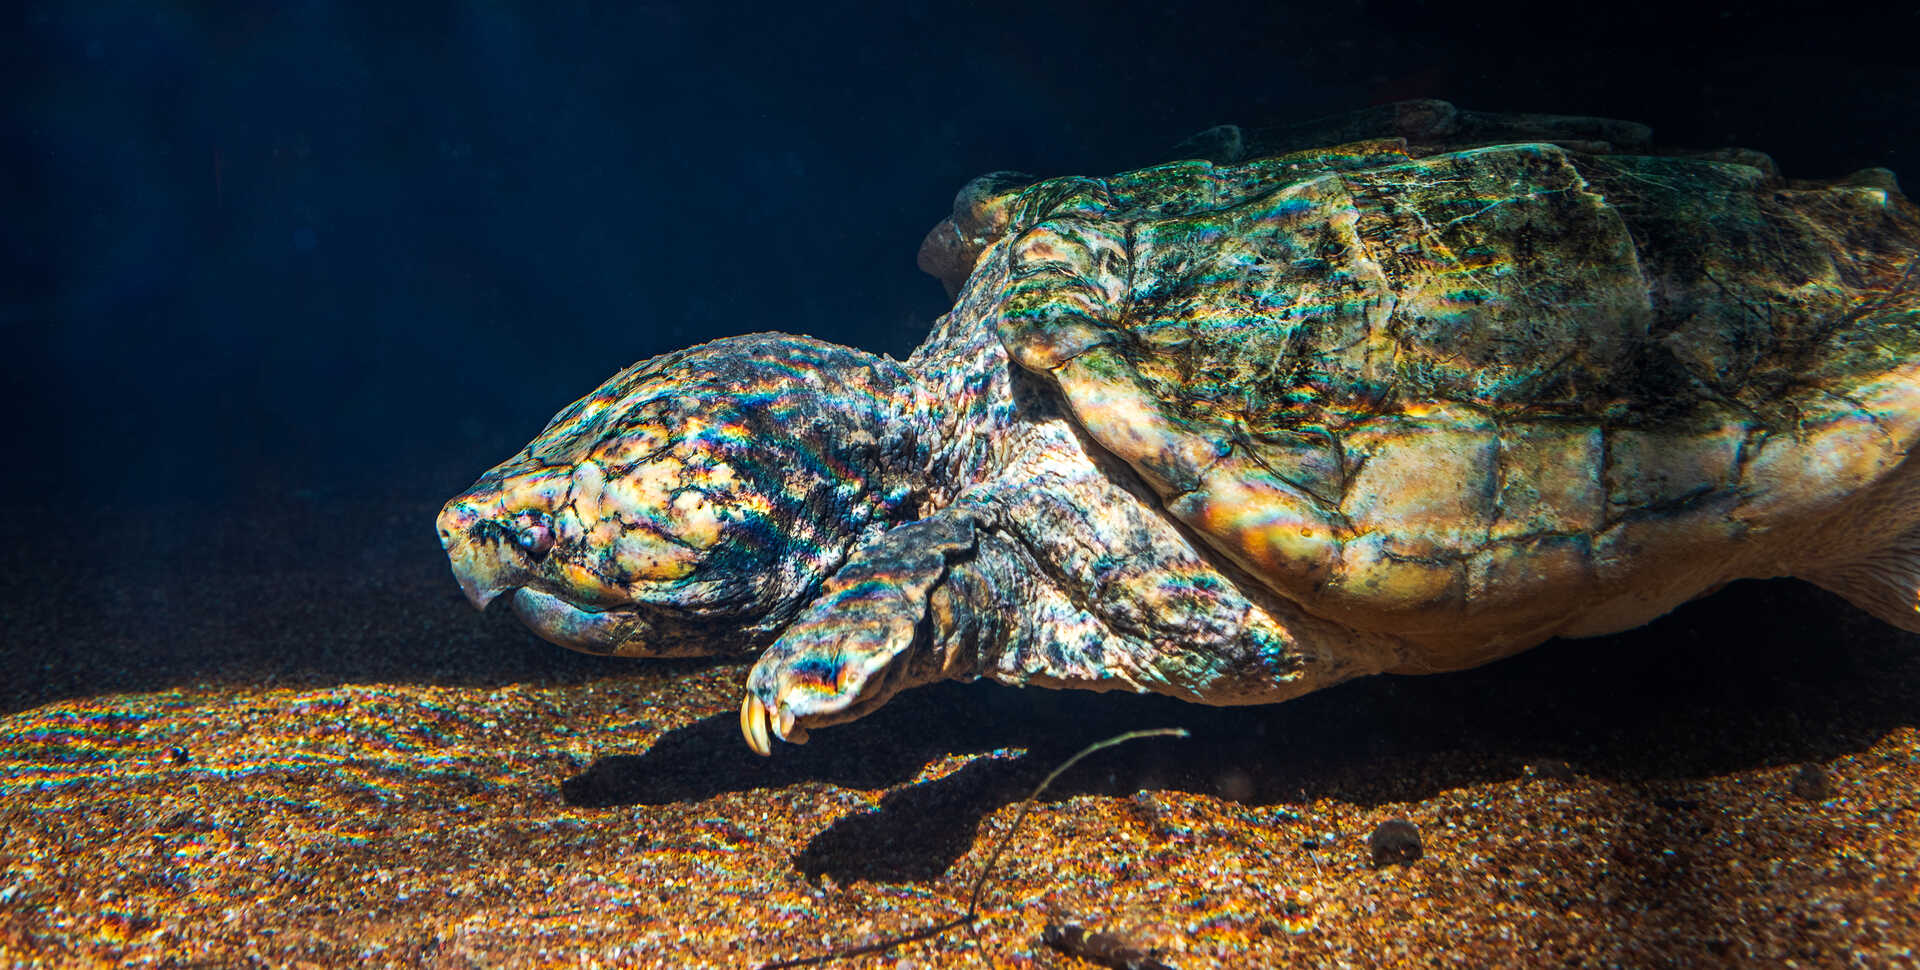 One of 3 alligator snapping turtles on exhibit at Steinhart Aquarium at Cal Academy. Photo credit: Gayle Laird